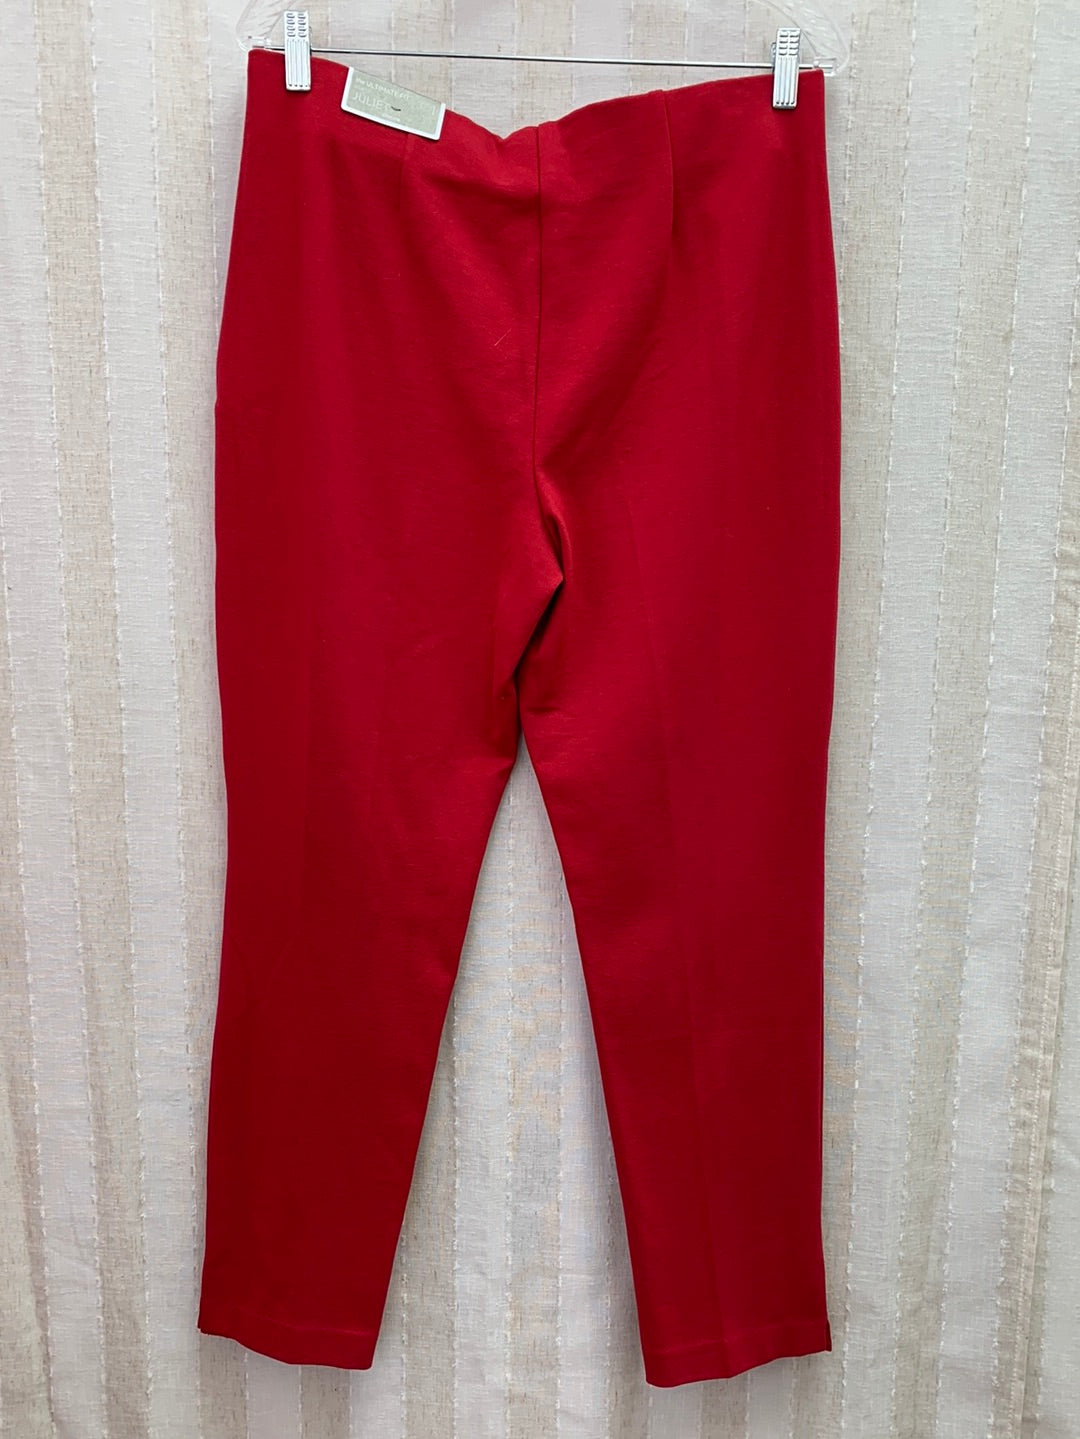 NWT - CHICO'S red Ponte Slimming Juliet Ankle Pants - 1 (US 8/M)